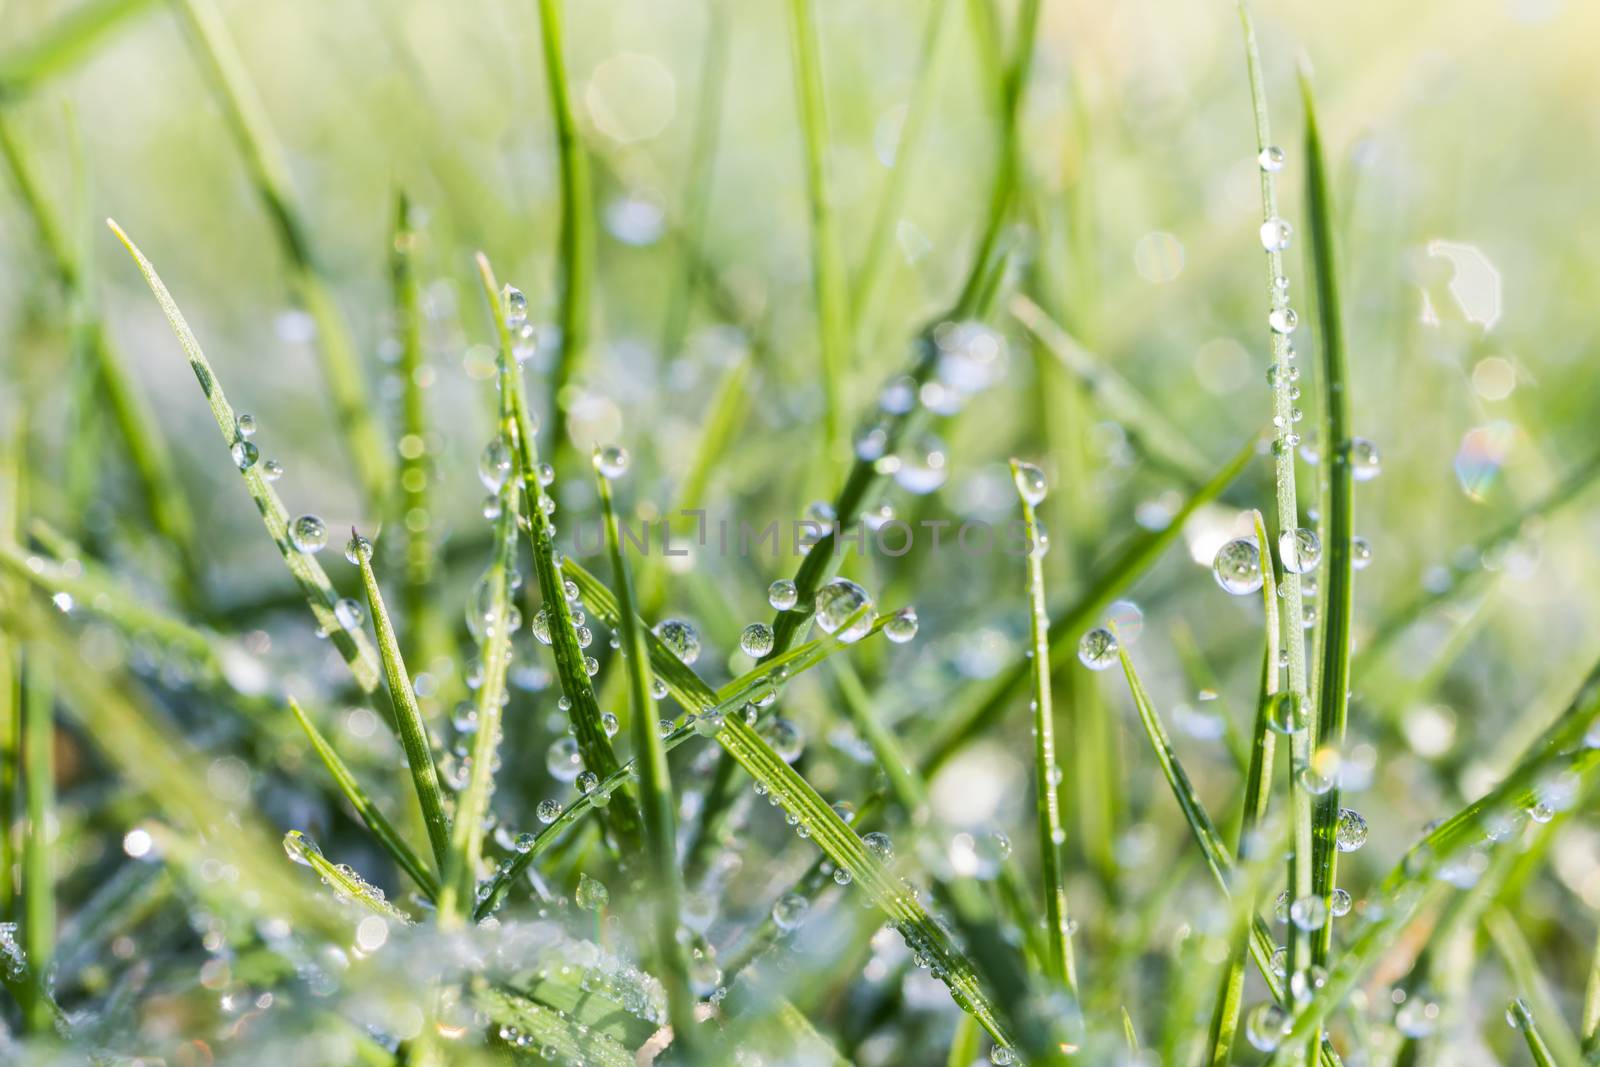 Many hanging water drops on green grass leaves at dawn